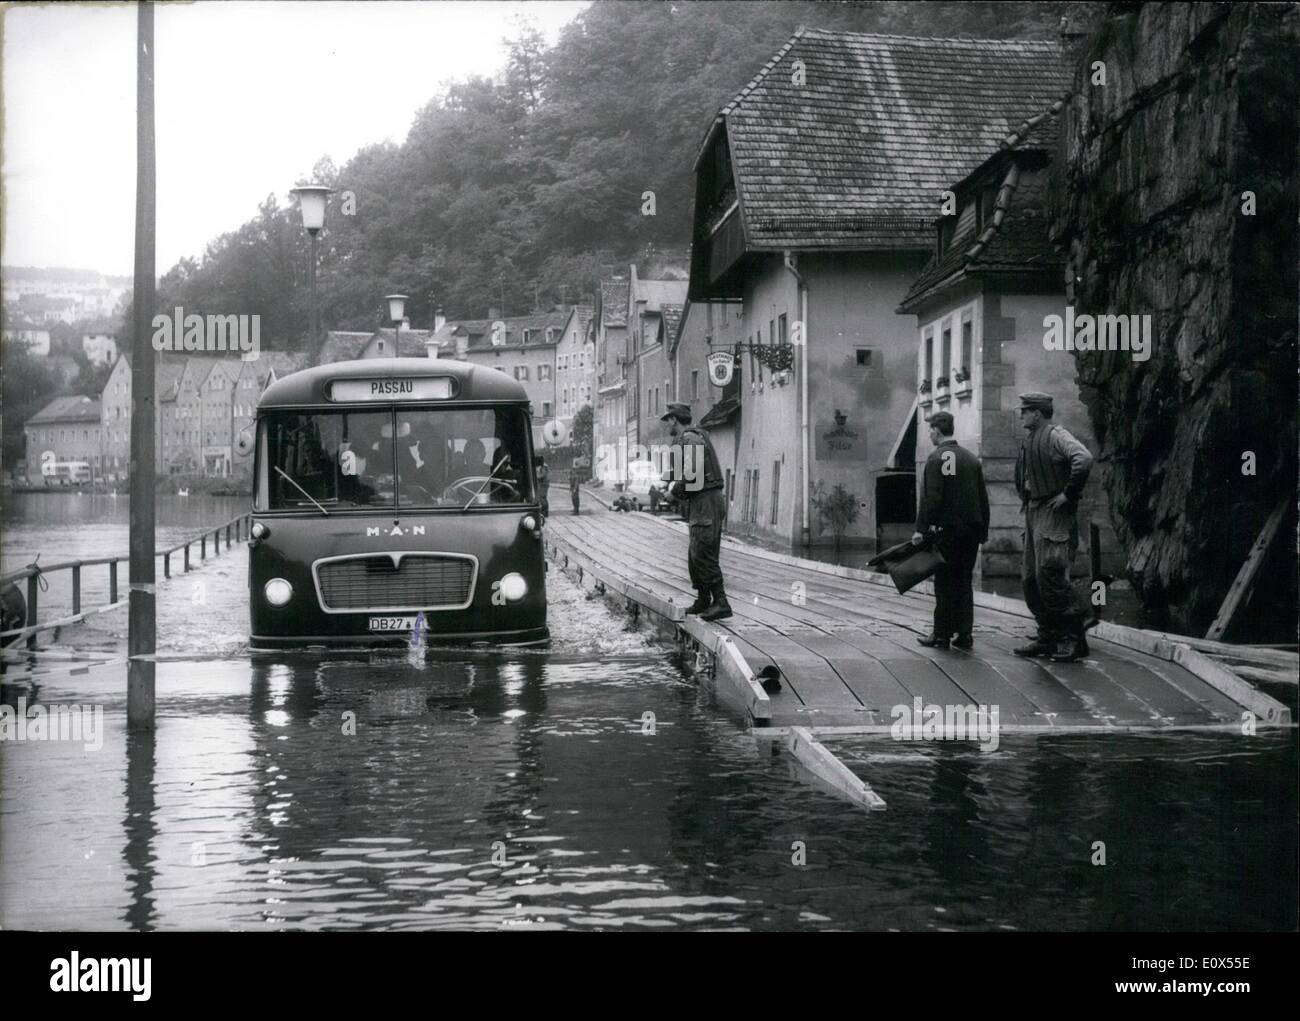 Jun. 06, 1965 - High-water in South Germanu! Since some weeks it is raining ''Cats and Dogs'' in South Germany, specially in Bavaria. Little brooks grow up to great rivers, and the water overflooded streets, fields cellars and meadows. Many streets are blockaded for cars, and the famous ''German Alps-Street'' is also impracticable. Specially the ''Three-River-Town'' Passau is overflowed, the Donau reached a water-high of 9,50m that means 5m more than the normal Stock Photo